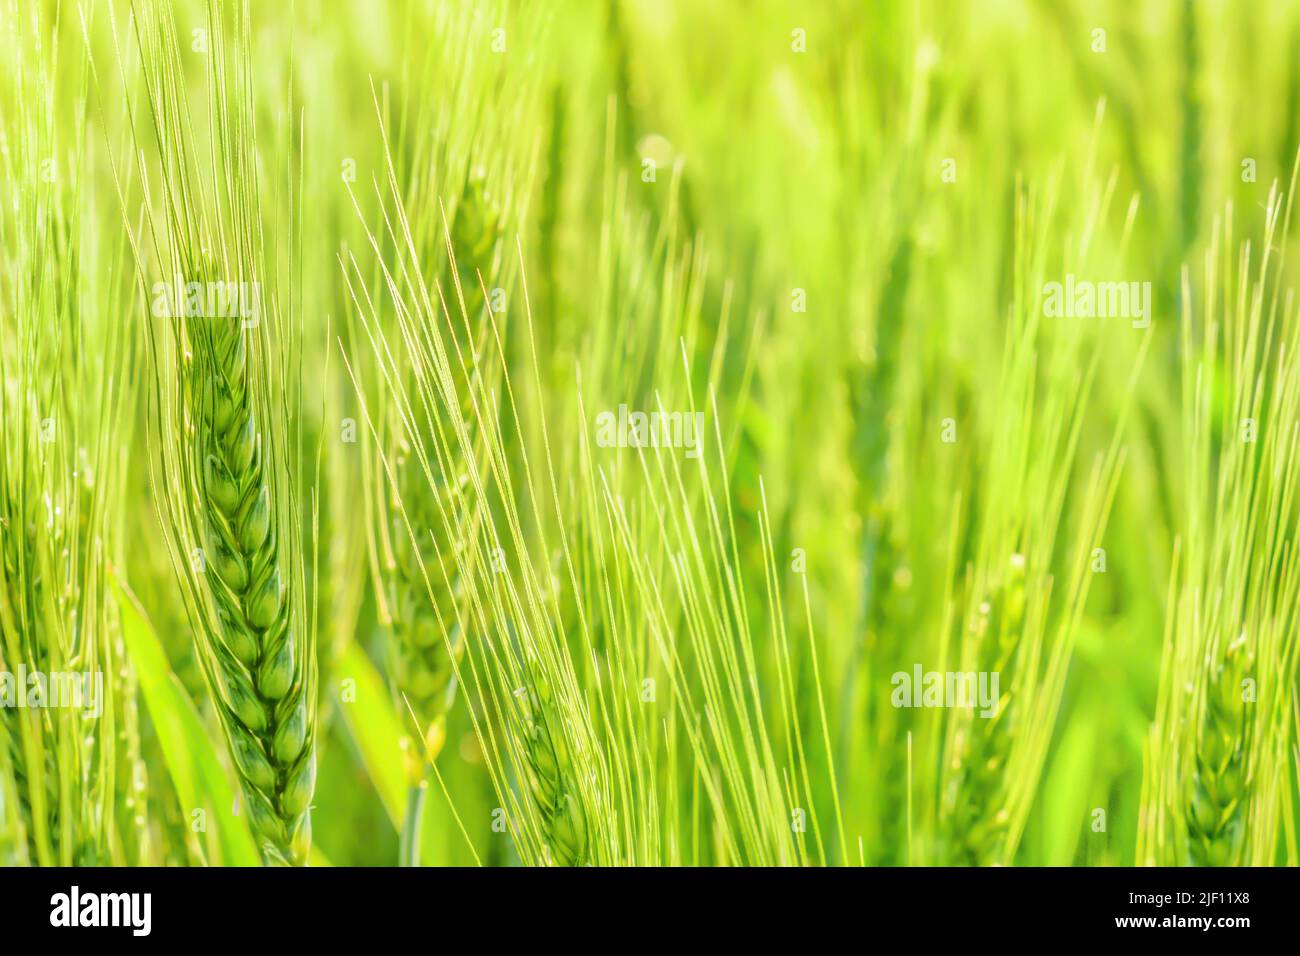 Growth cereal field agriculture wheat background. Green wheat growing field grain ears of barley green rye grain farm agriculture background. Organic Stock Photo